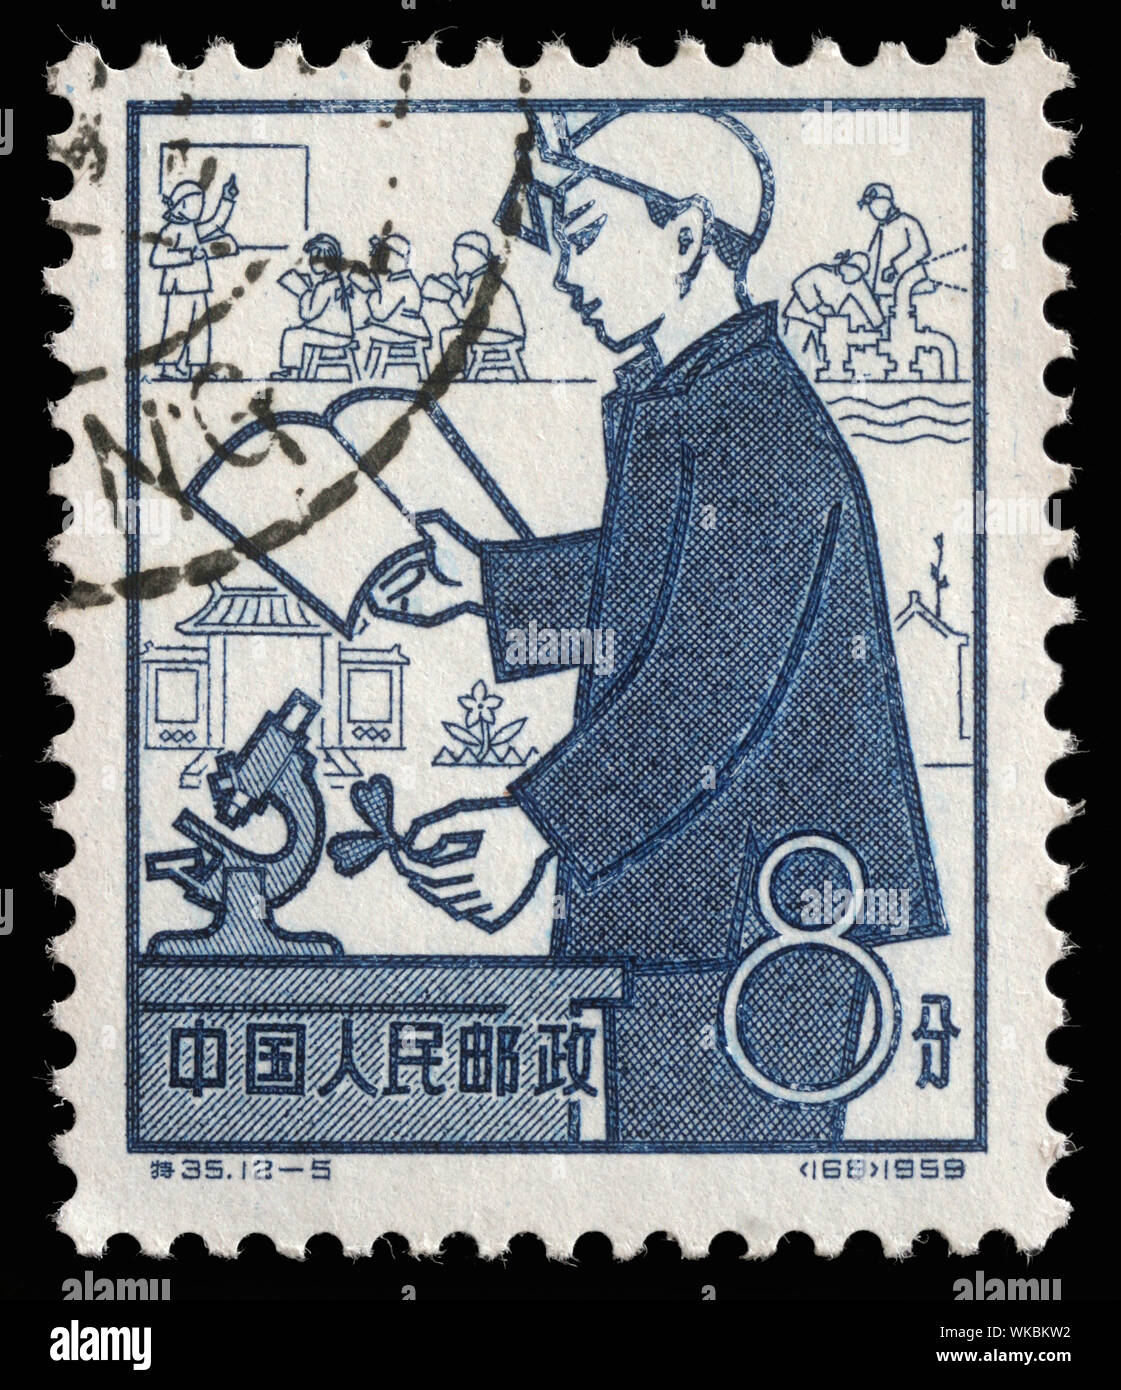 Stamp issued in the China shows Education, the 1st Anniversary of People's Communes, circa 1959. Stock Photo